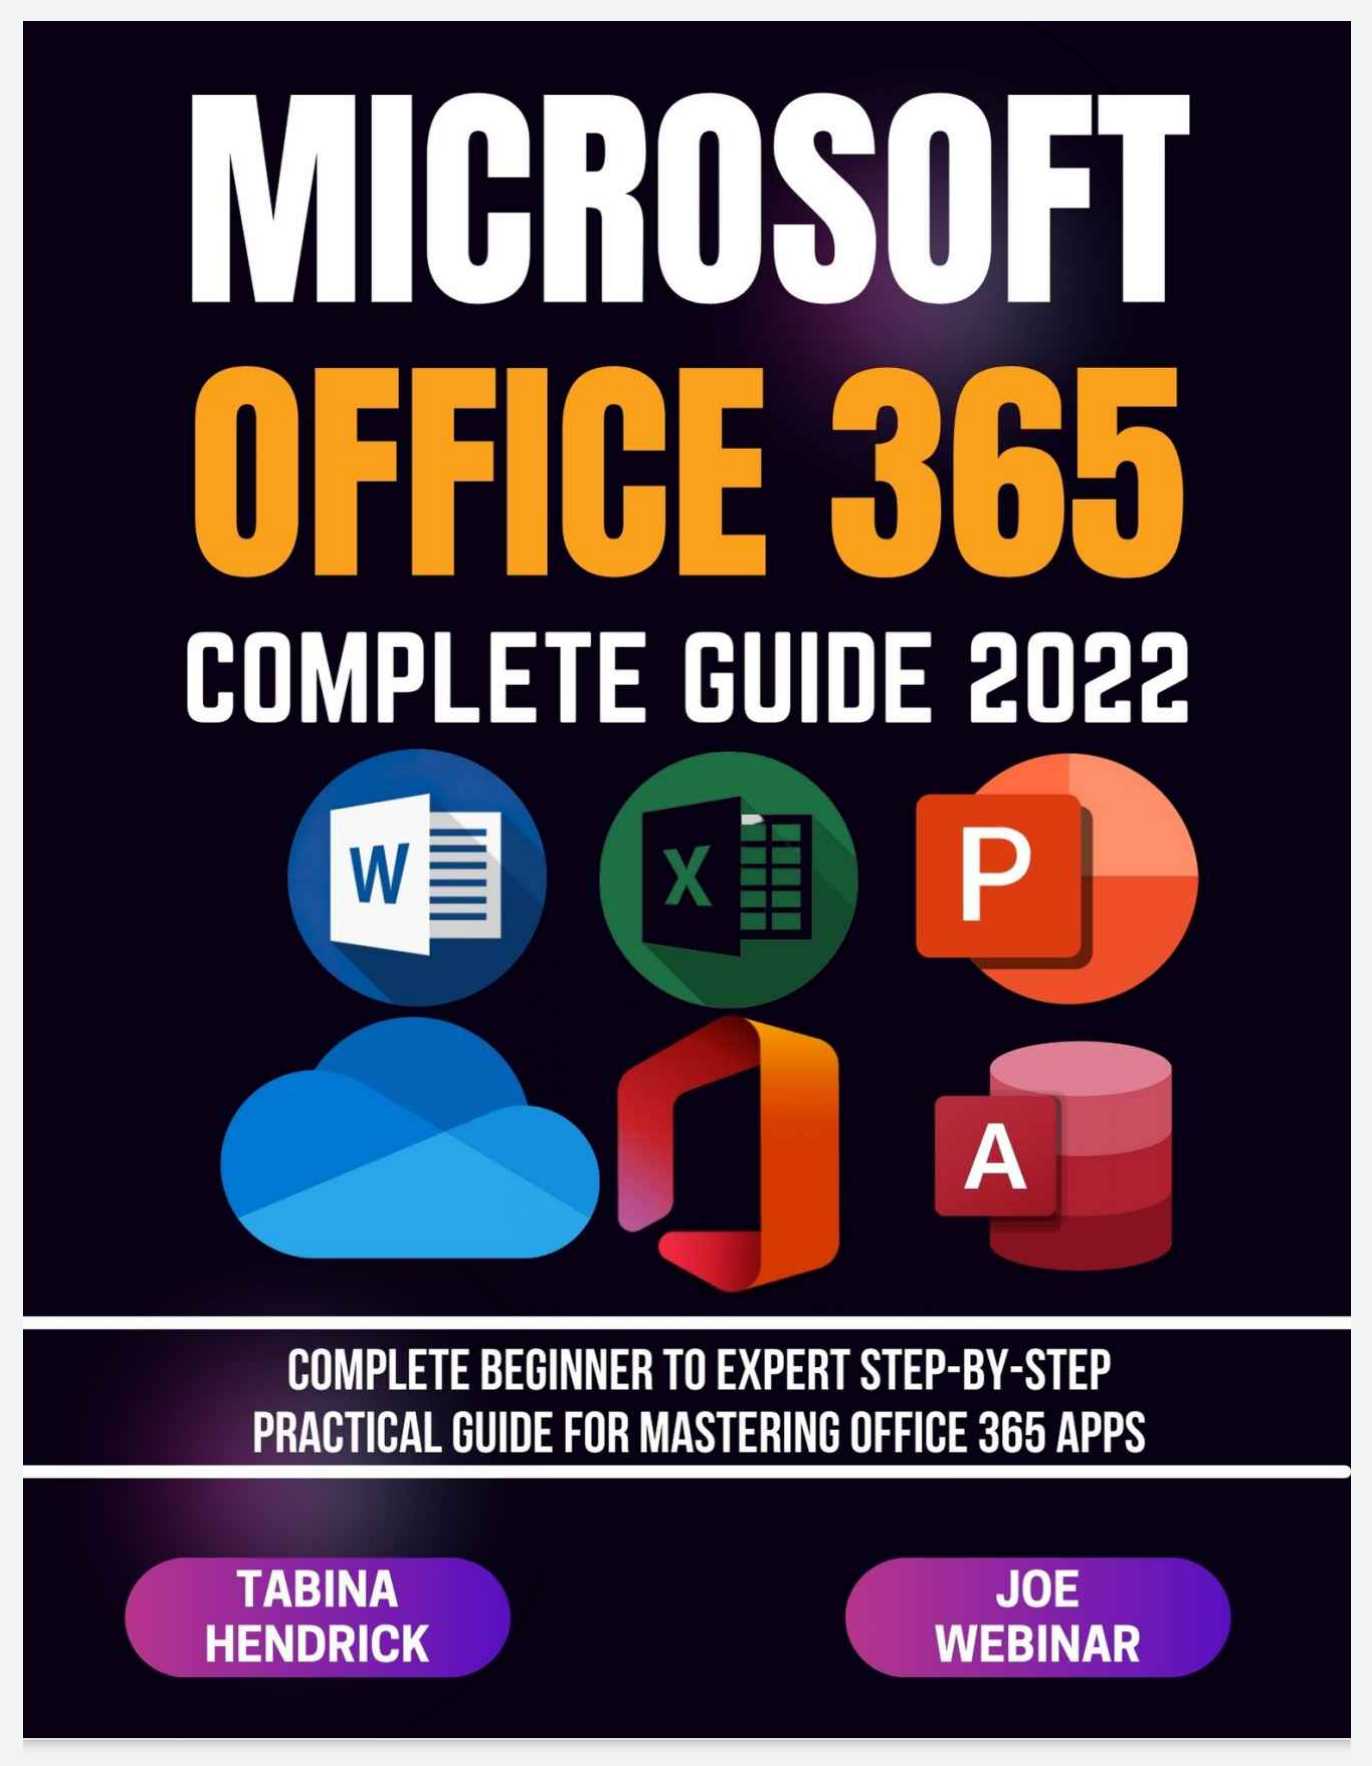 OFFICE 365 COMPLETE GUIDE 2022 PDF